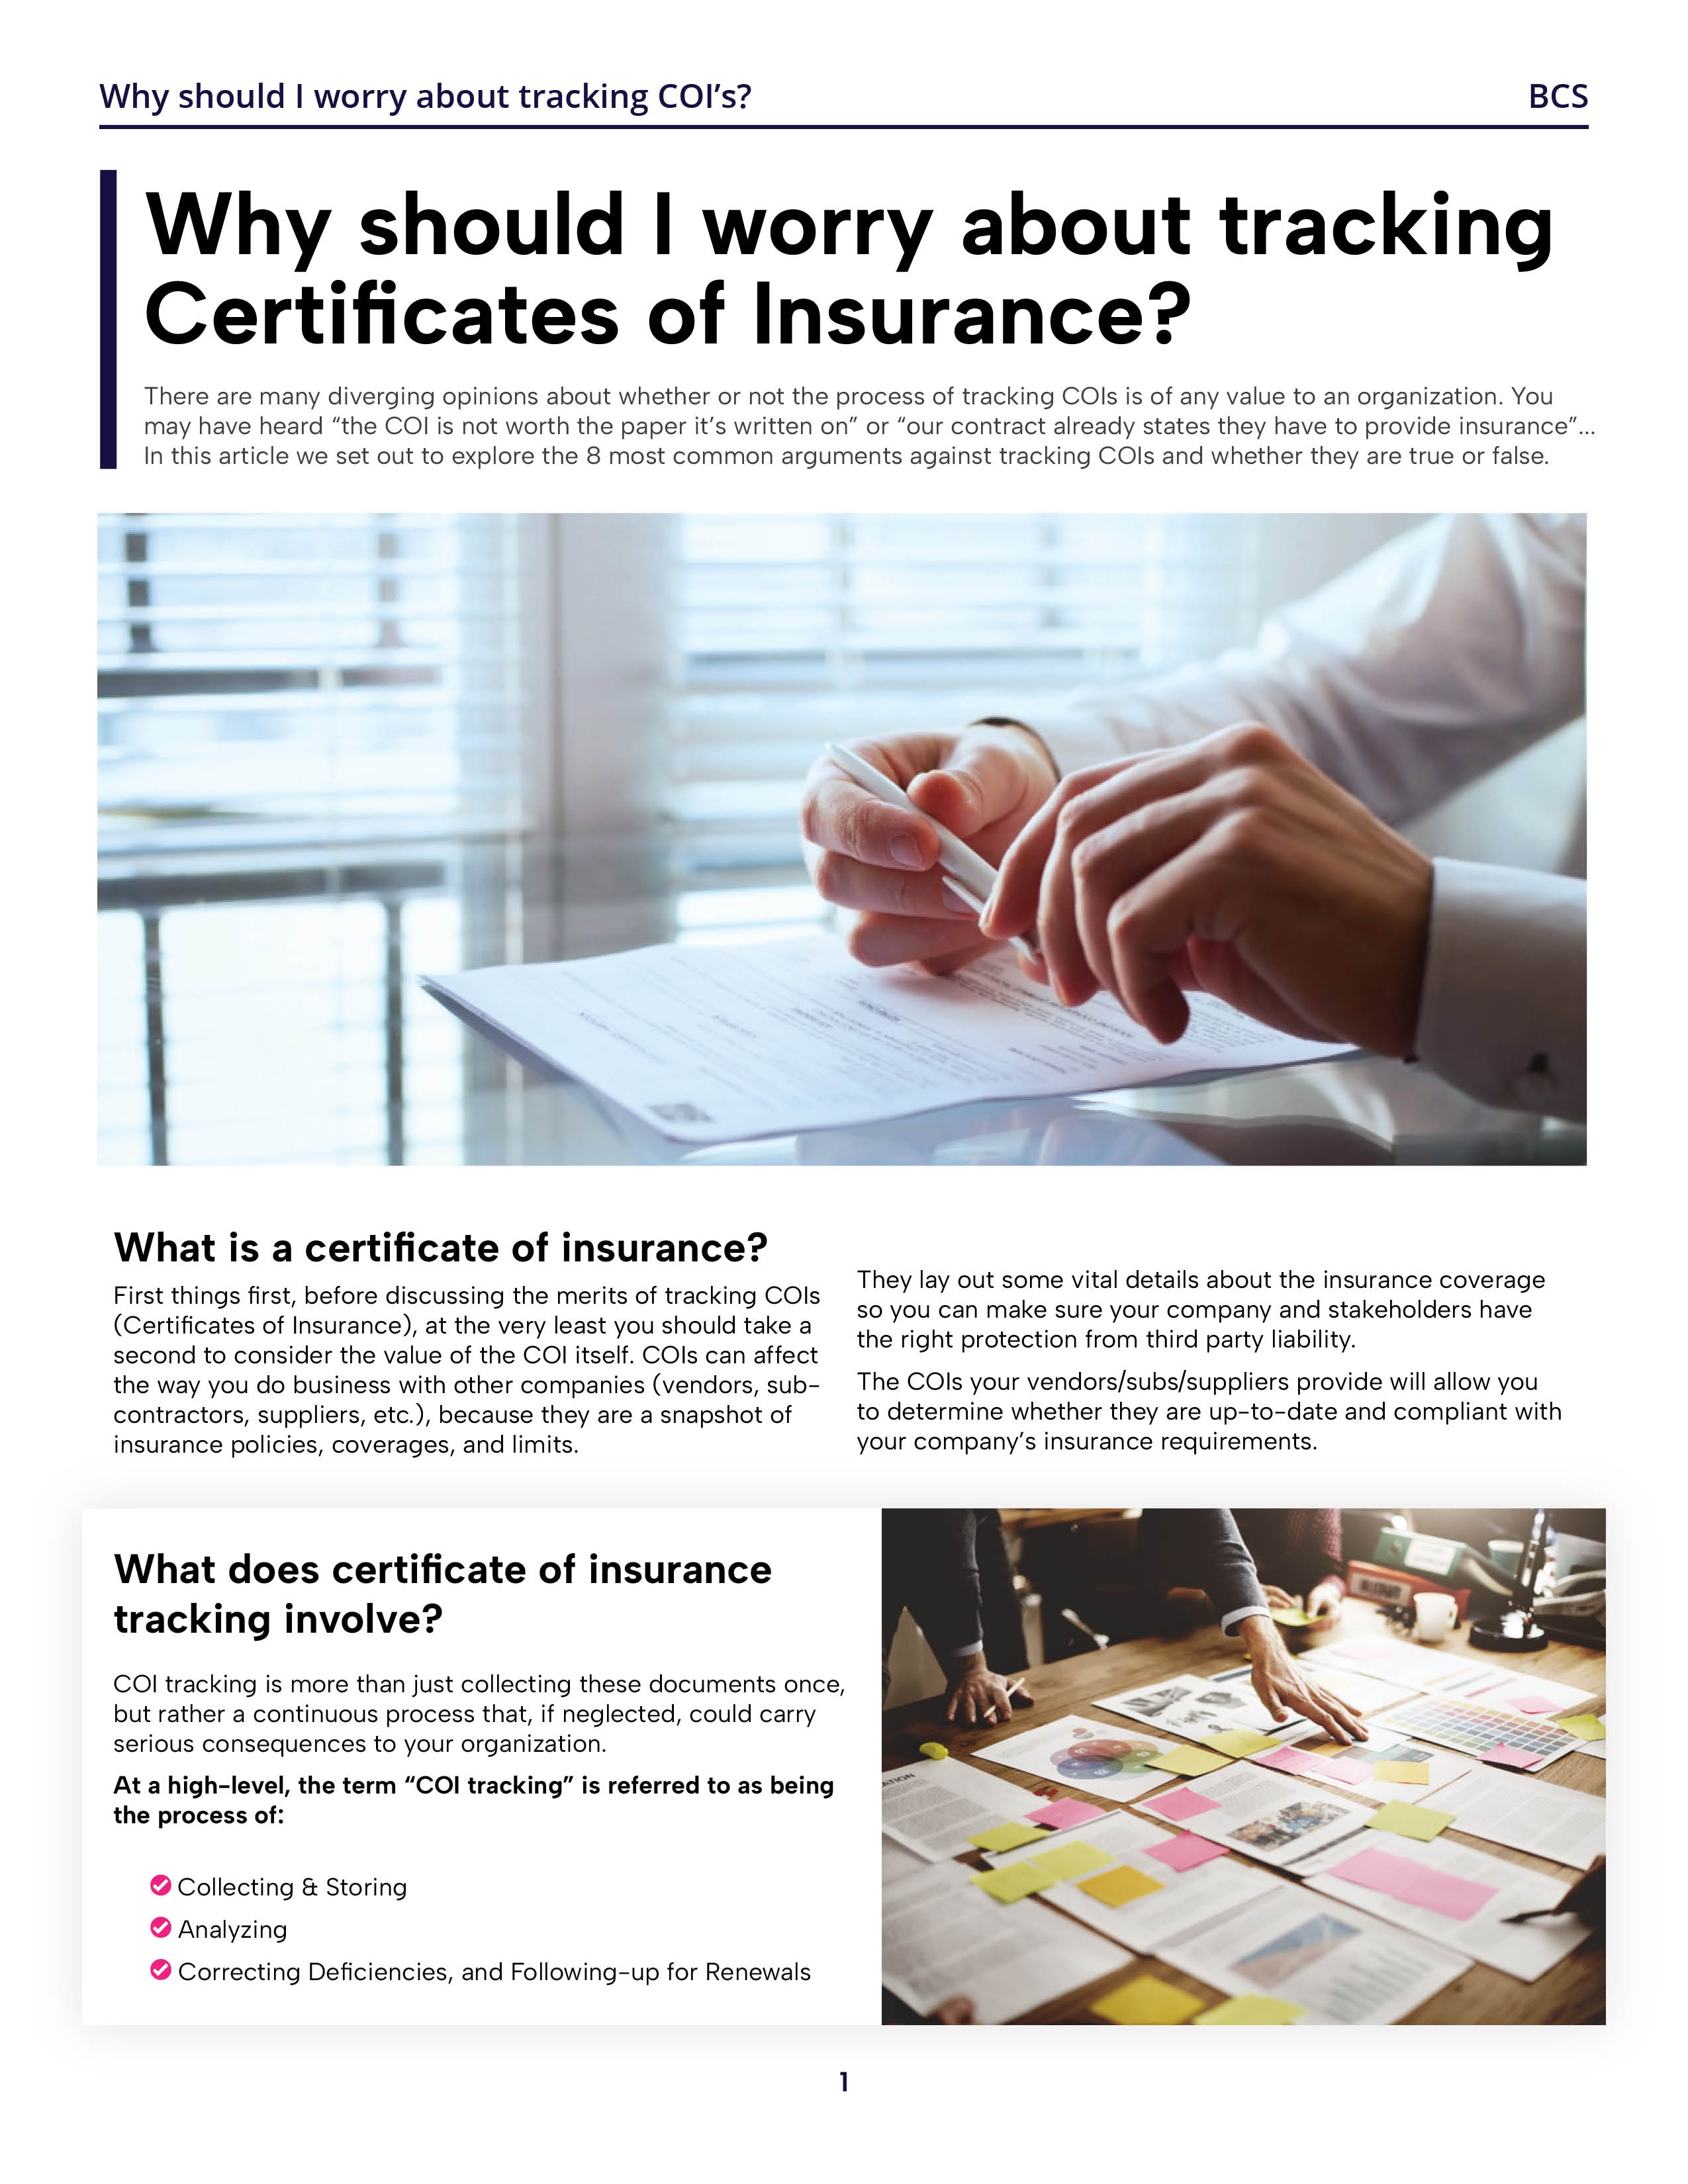 BCS-Download-Why-should-I-worry-about-tracking-Certificates-of-Insurance